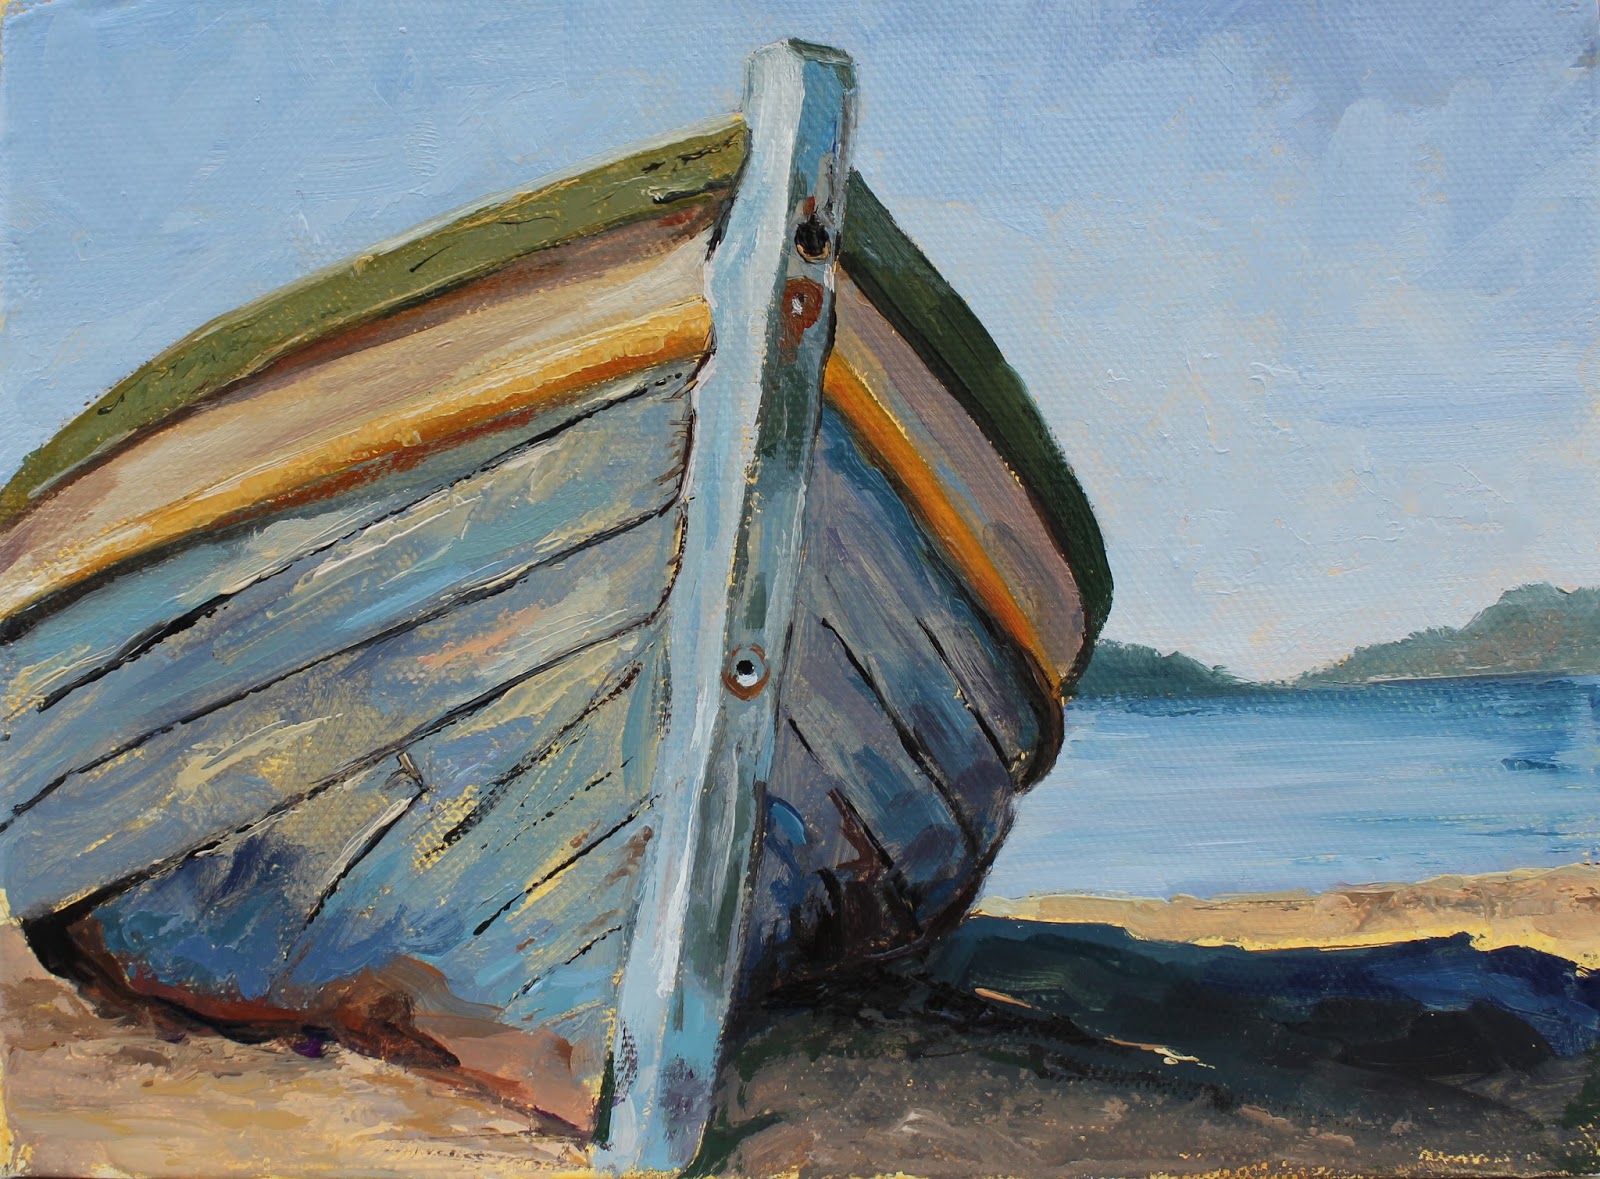 Marco A. Vazquez: oil painting boat